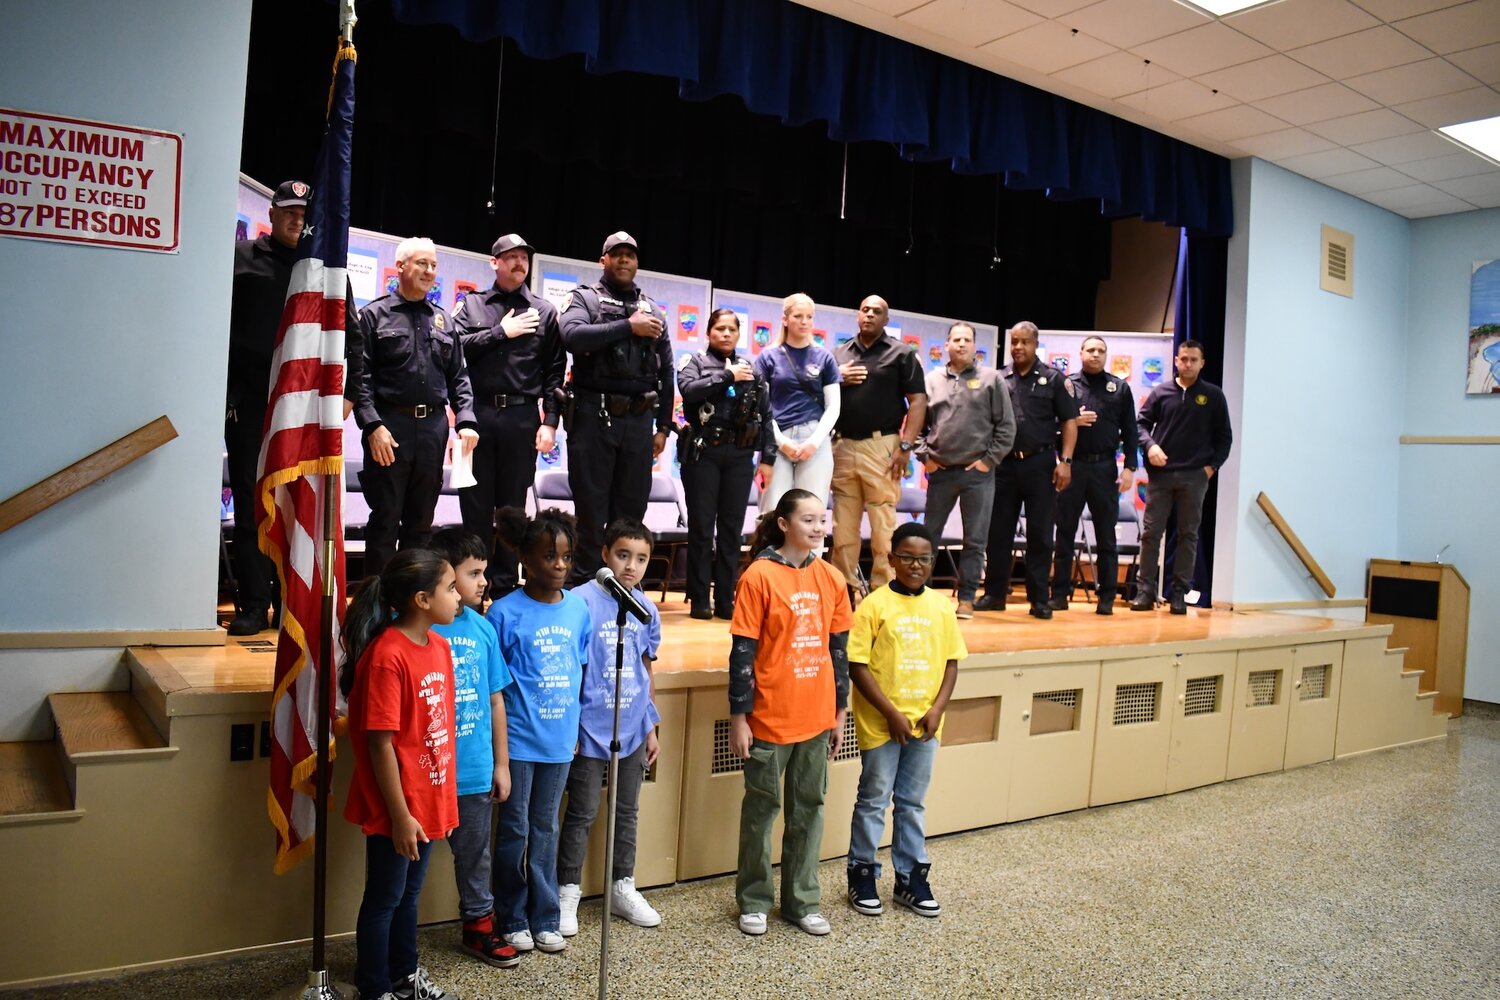 Students in the Leo F. Giblyn Elementary School color guard led the Pledge of Allegiance to kick off the school’s annual Adopt-a-Cop ceremony.